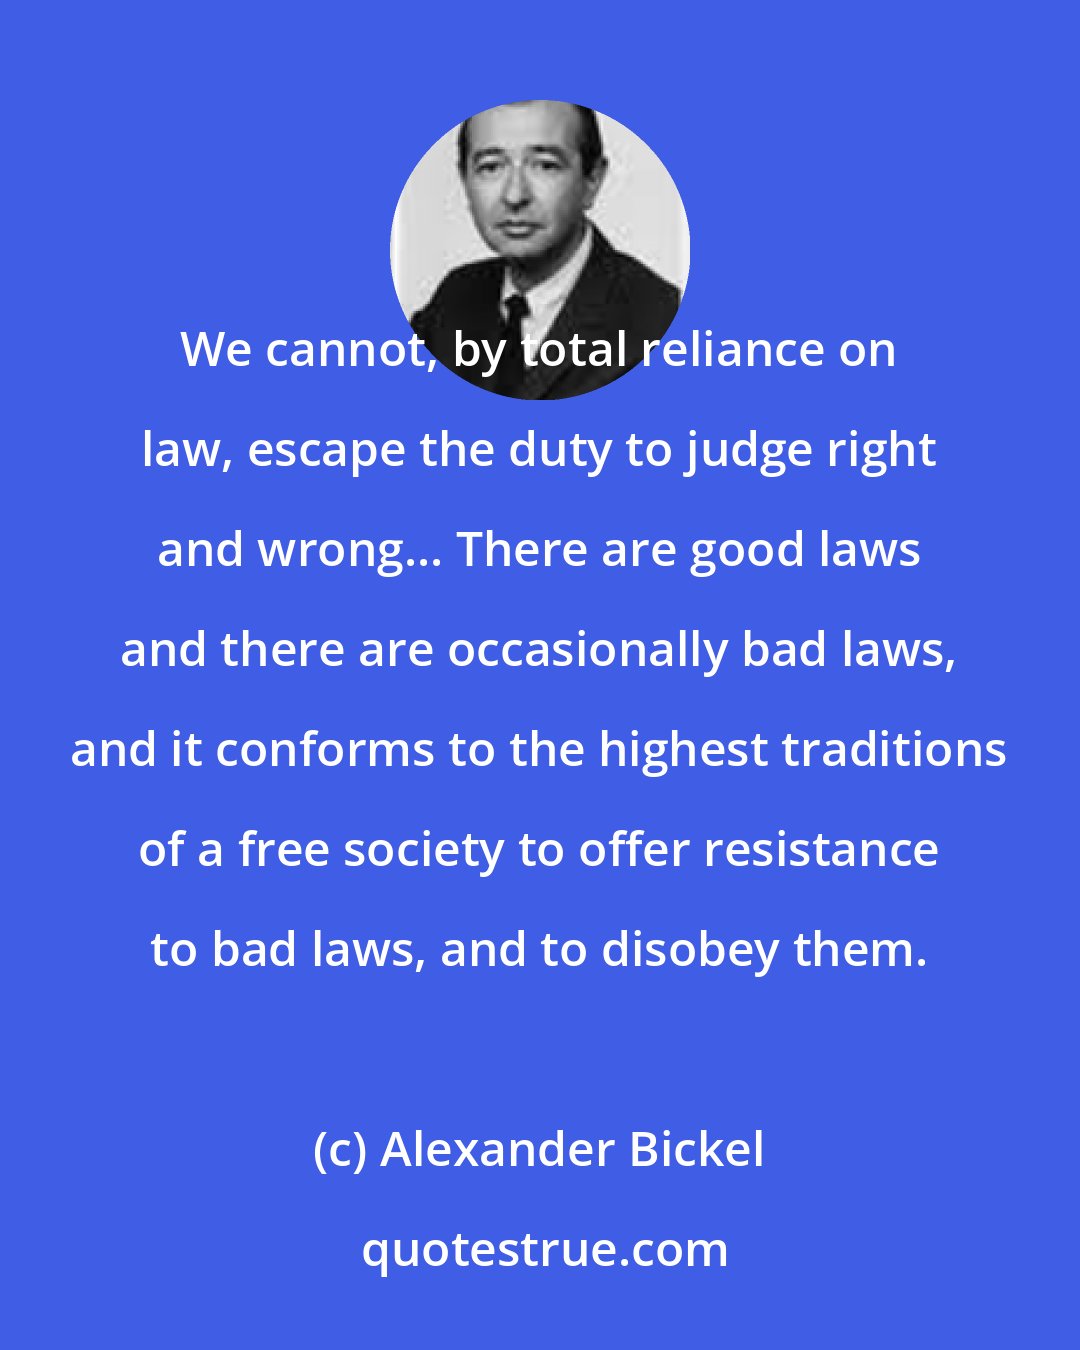 Alexander Bickel: We cannot, by total reliance on law, escape the duty to judge right and wrong... There are good laws and there are occasionally bad laws, and it conforms to the highest traditions of a free society to offer resistance to bad laws, and to disobey them.